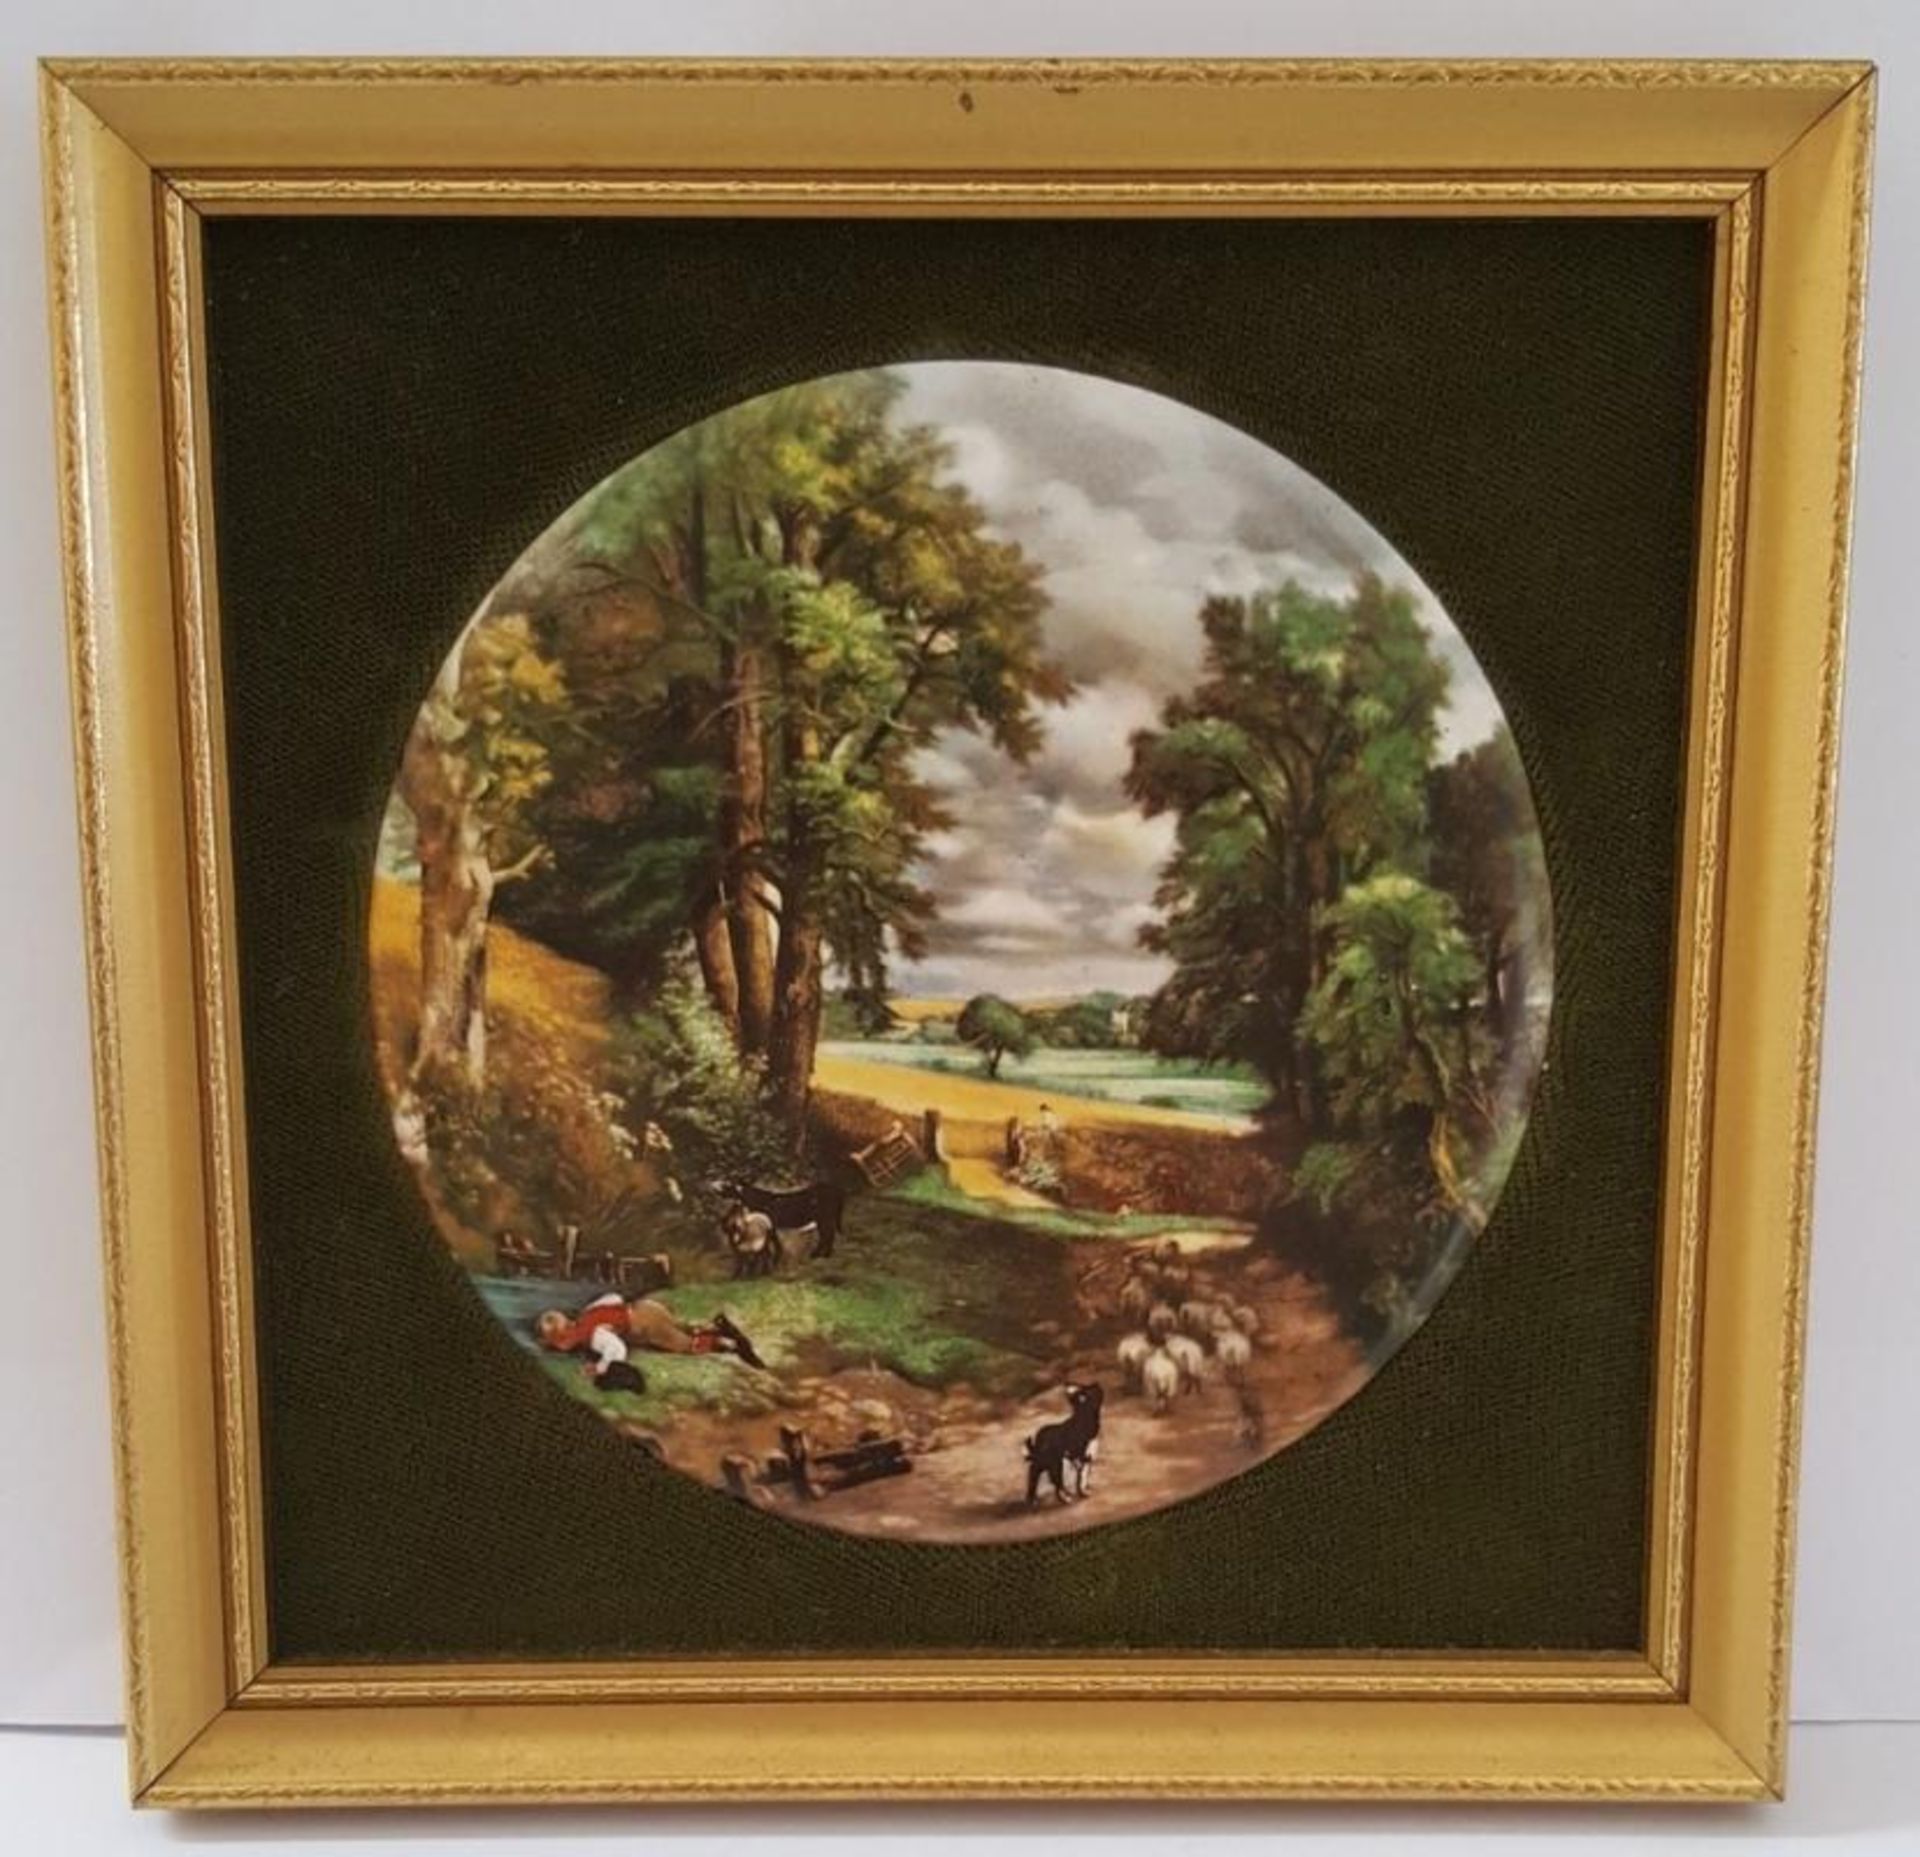 1 x Corn Field by Constable Harleigh China Staffordshire Ceramic Framed Miniature Picture - Dimensio